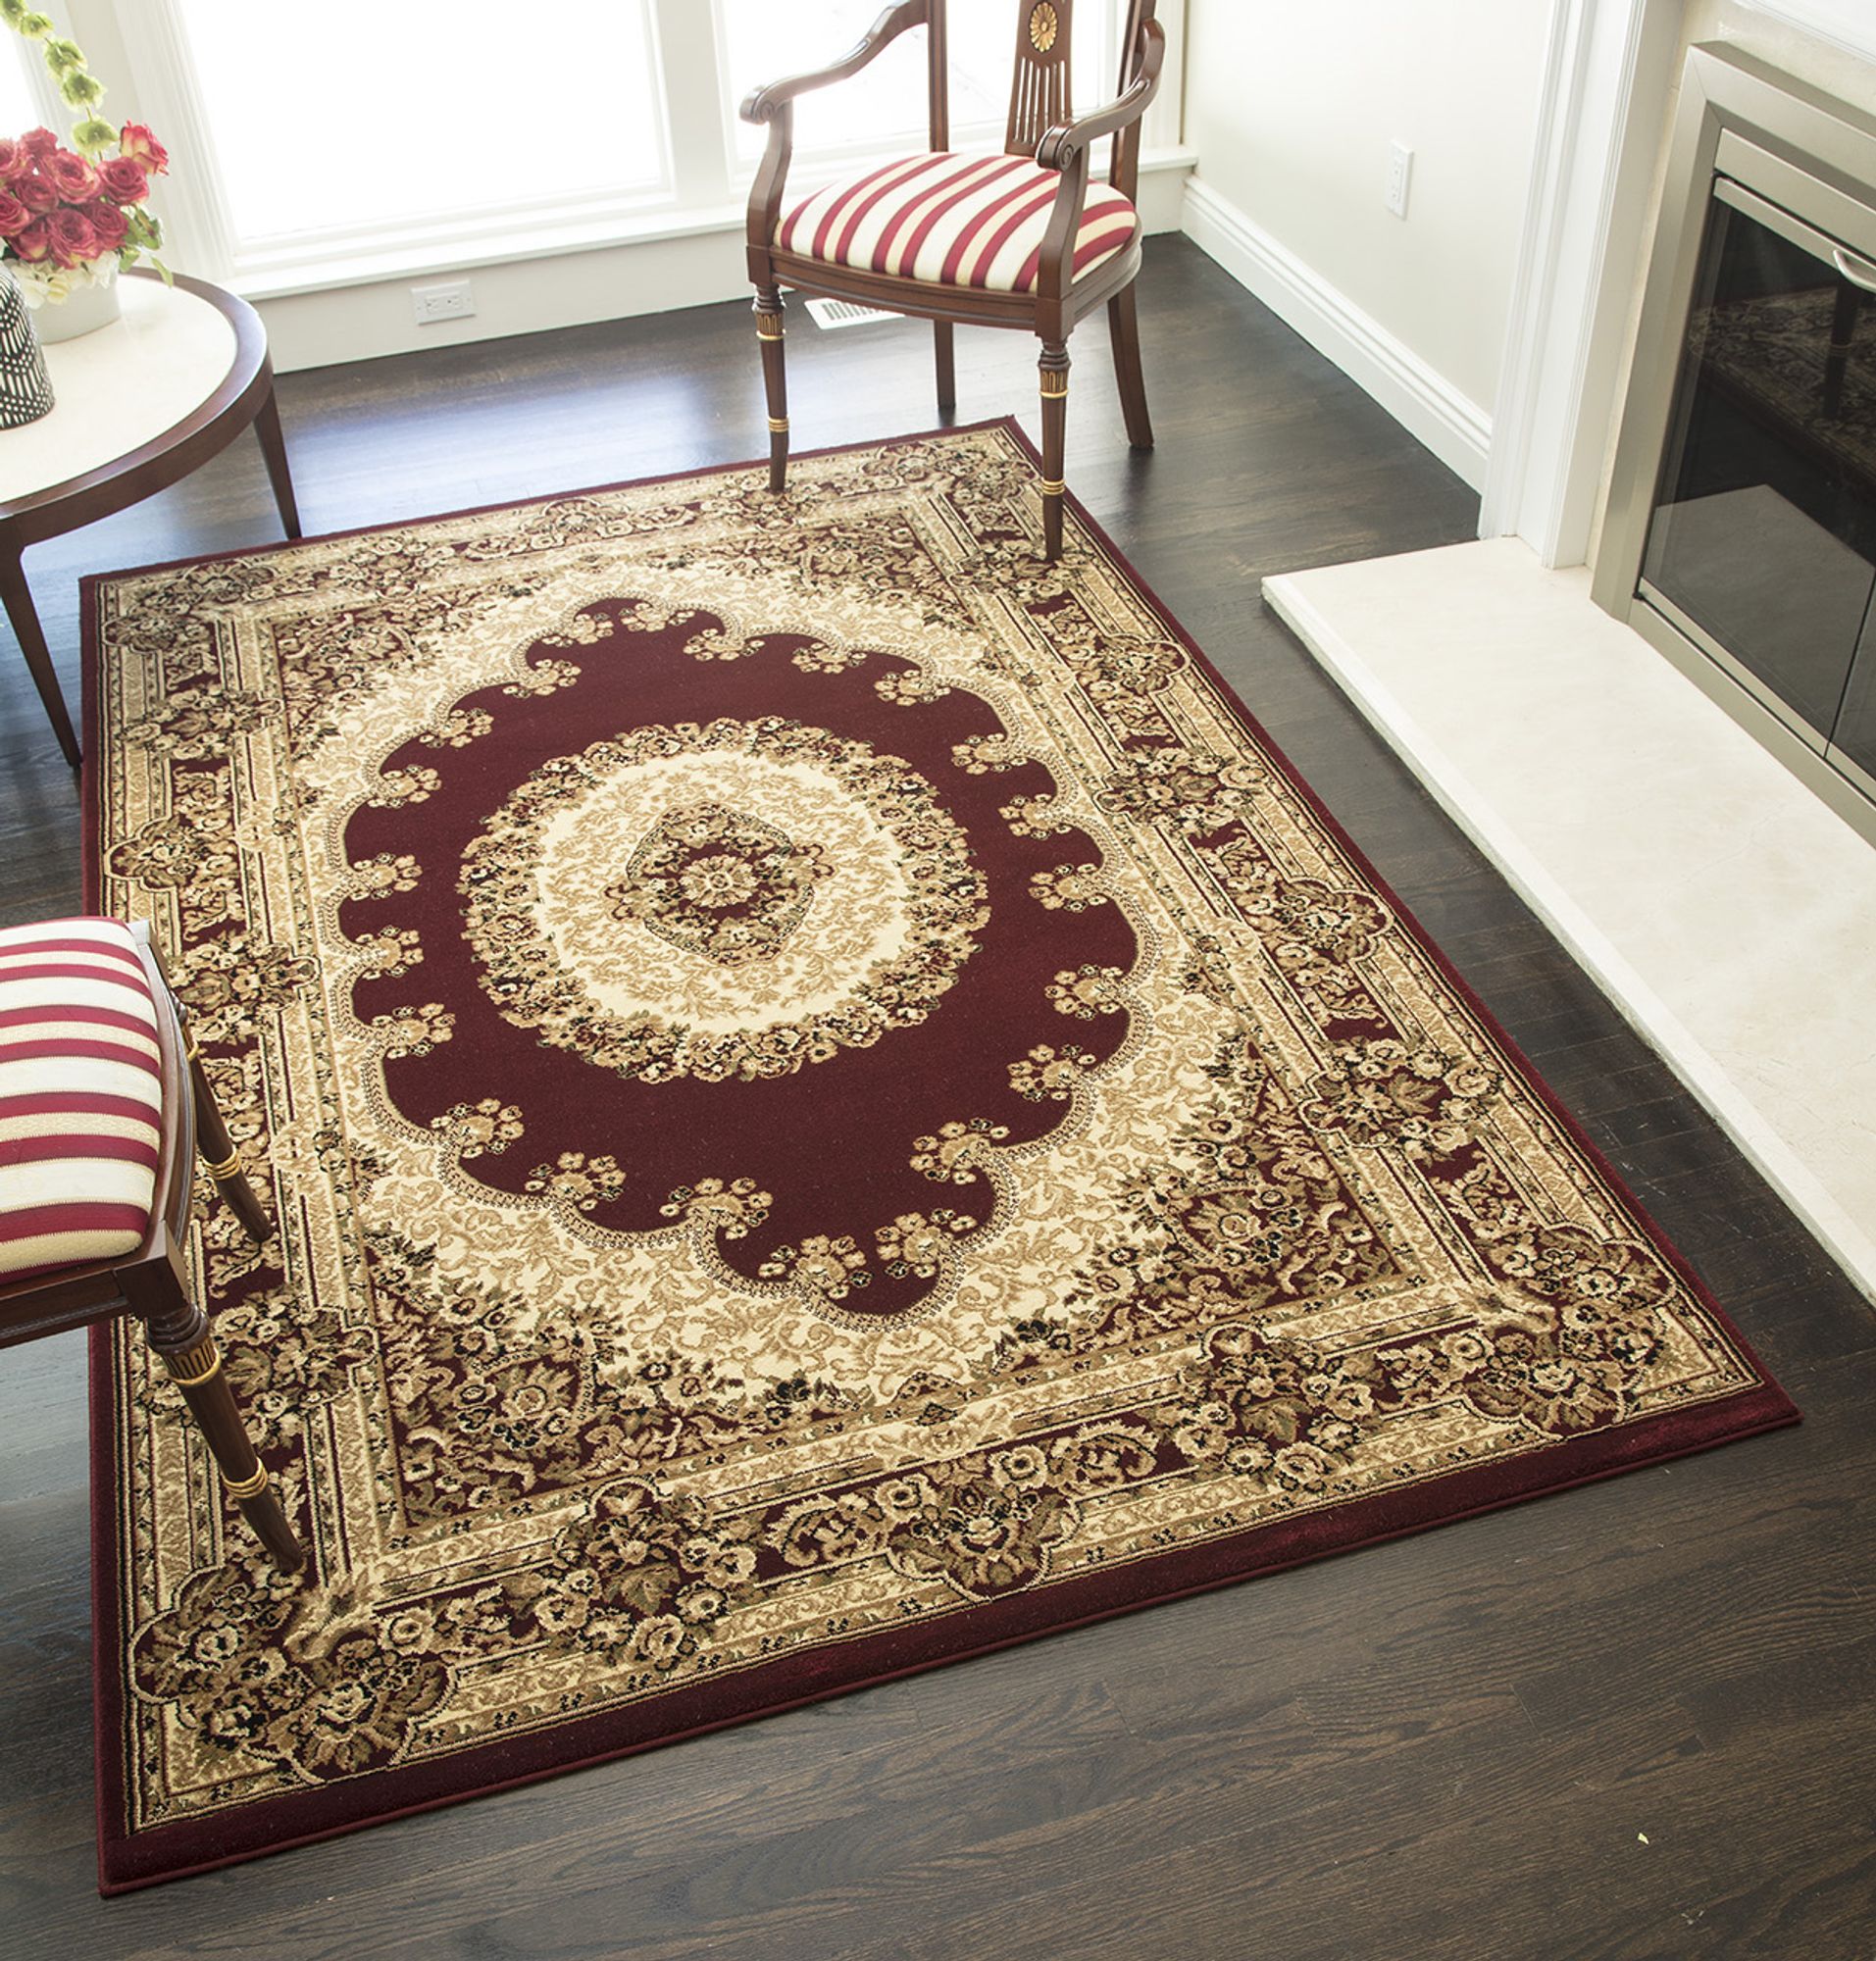 Rugs America Vista 807-RED Kerman Red Oriental Traditional Red Area Rug, 9'10"x13'2" - image 2 of 5